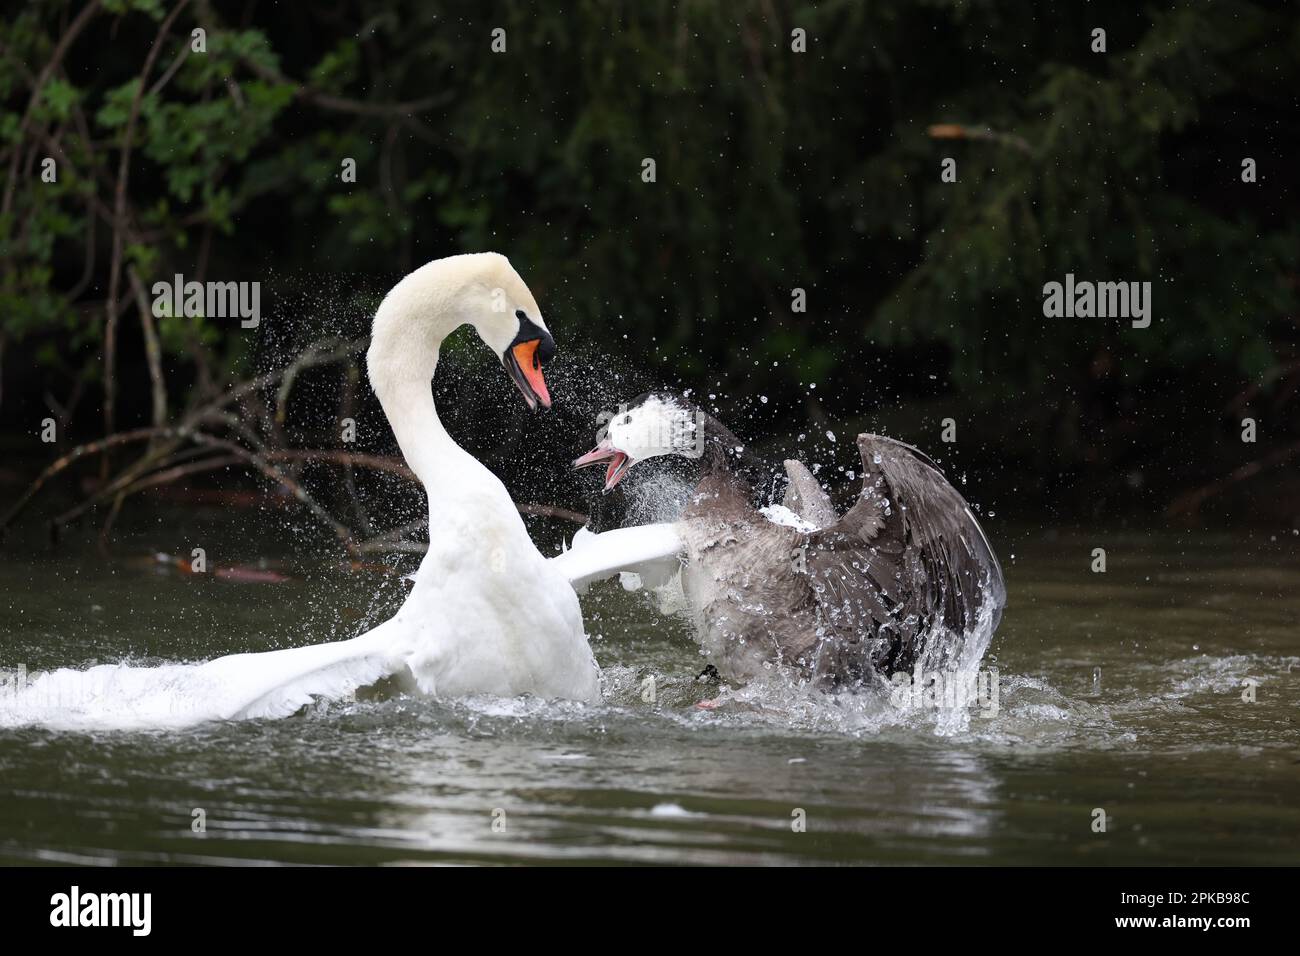 Mute swan and gander in a park in Paris, Ile de France, France. Stock Photo